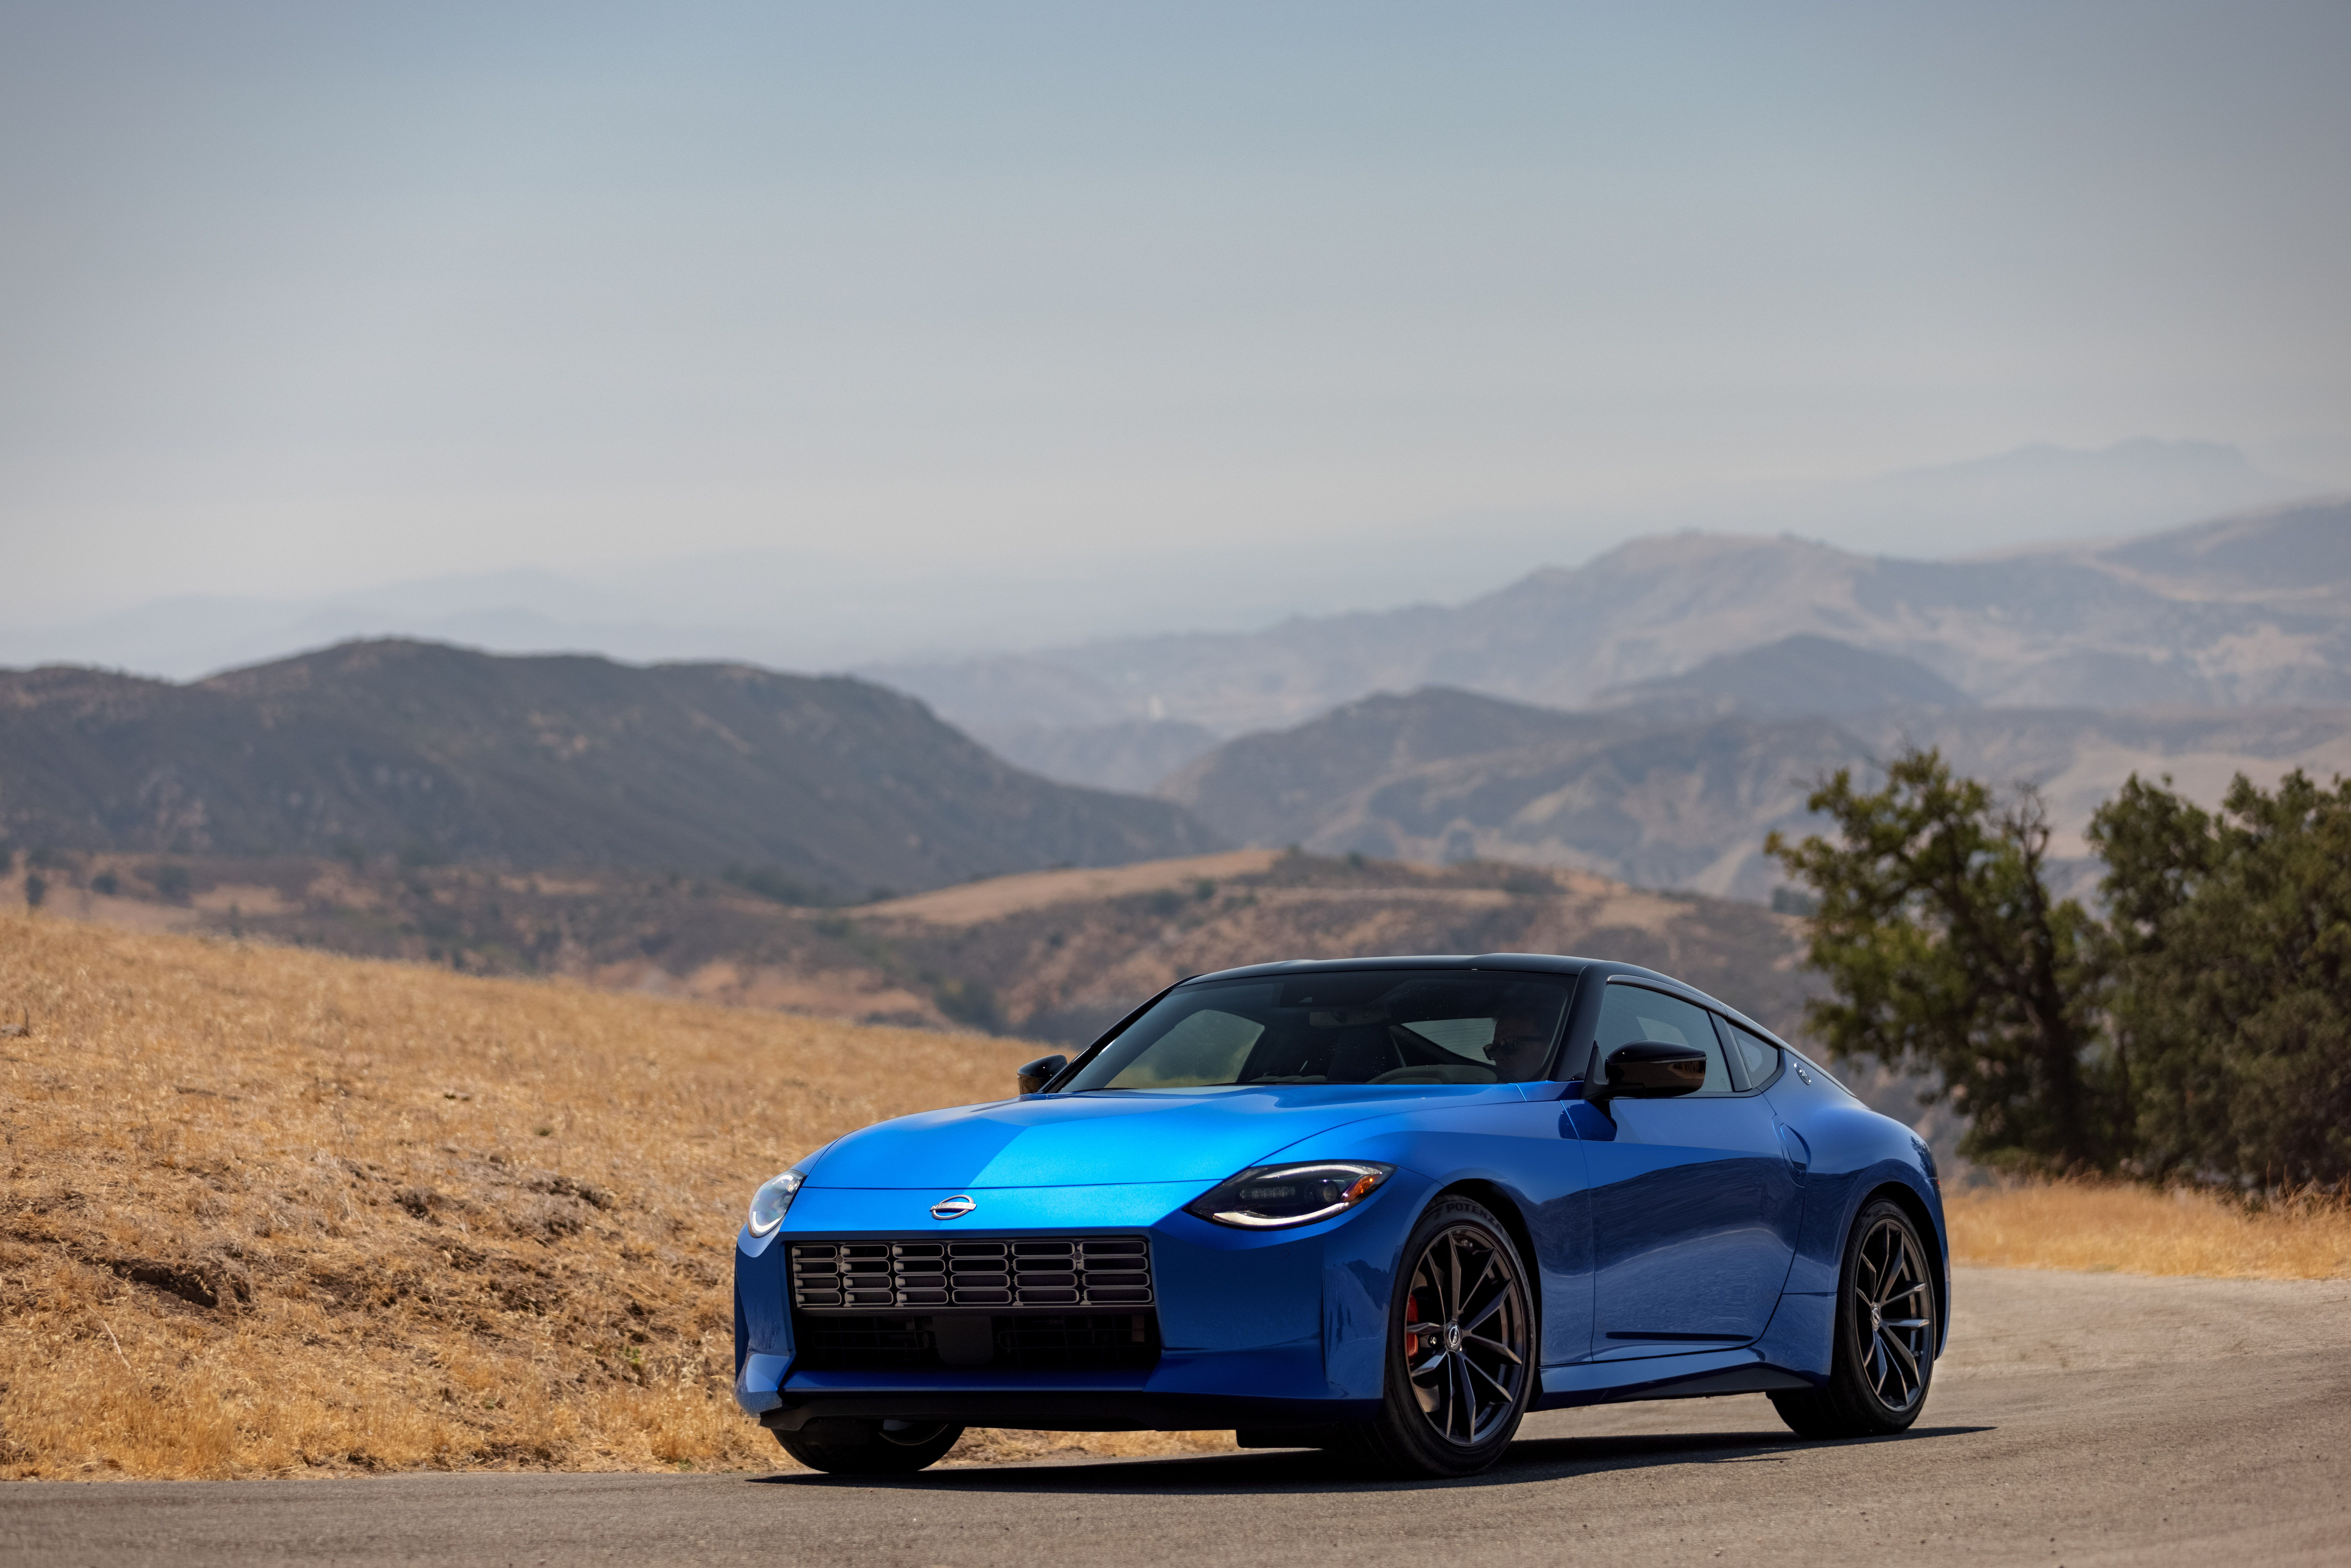 2022 Official Prices For The Nissan Z Will Be Announced In Spring 2022, And Here's What We Found Out